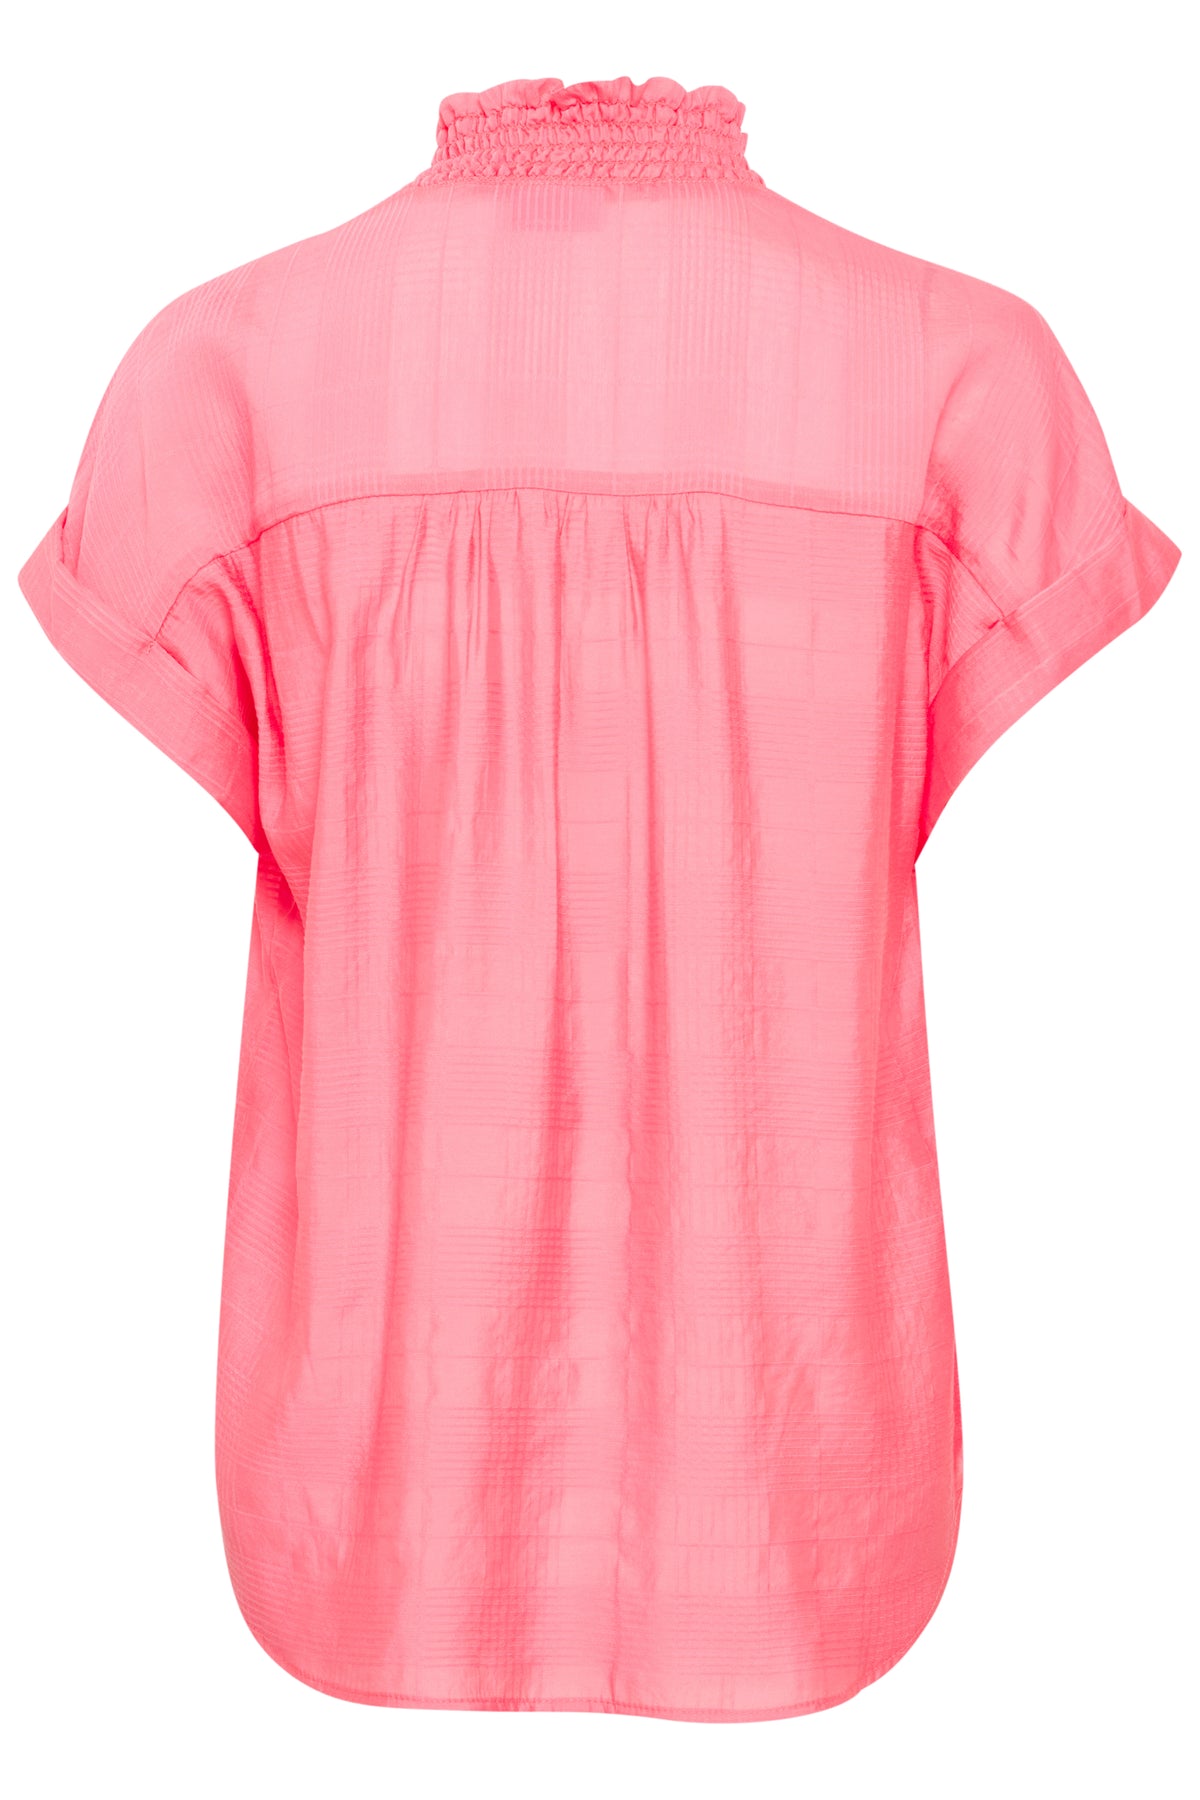 Fransa Tiani Pink Carnation Relaxed Fit Shirt, 20613842